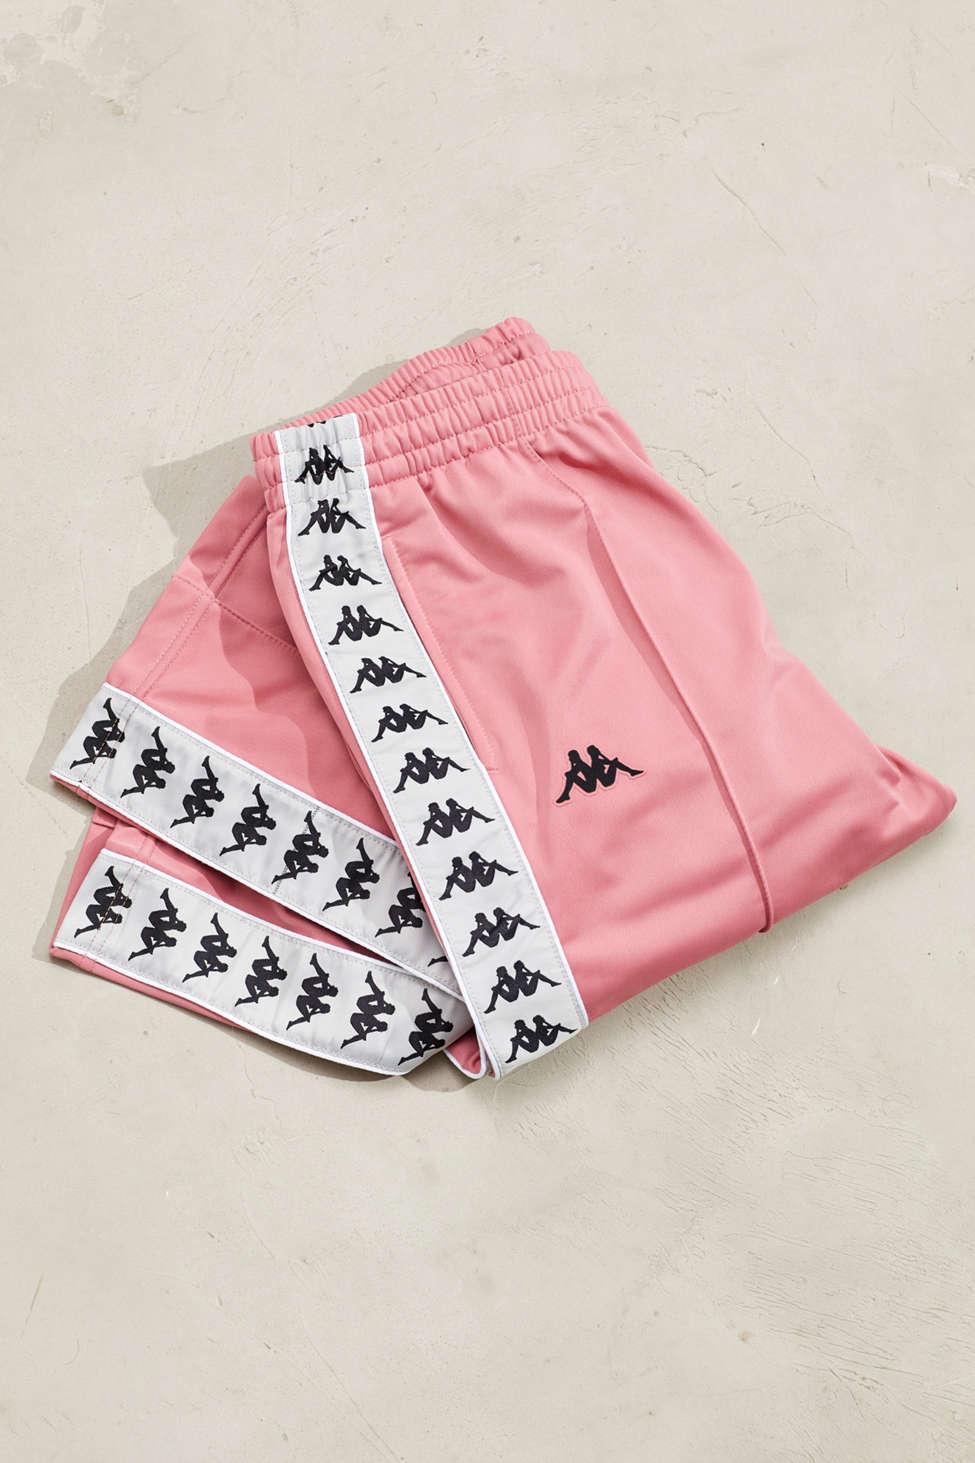 Kappa Synthetic Silver Banda Astoria Track Pant in Pink for Men - Lyst